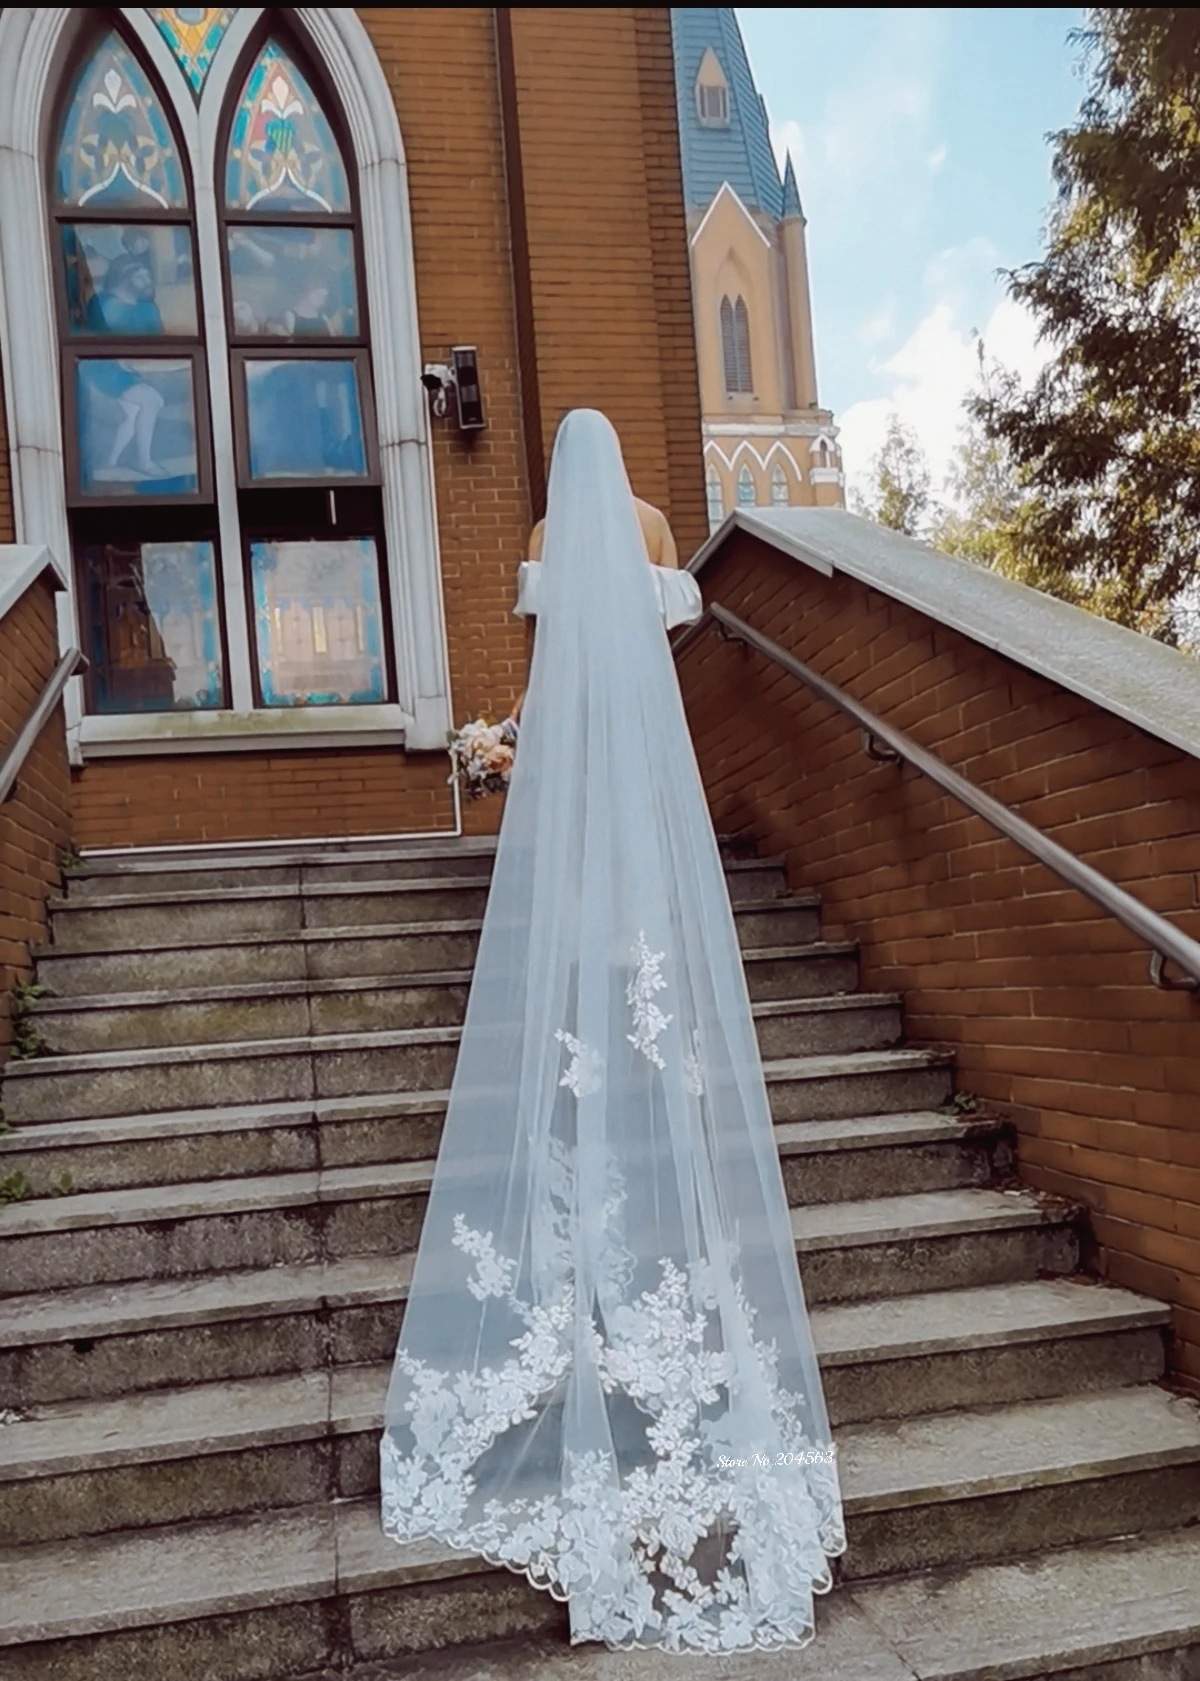 https://ae01.alicdn.com/kf/Ha264cc7e013d4d0191d2f1e83bfafd81z/Romantic-One-Layer-Wedding-Veil-Church-Lace-Bridal-Veil-with-Comb-Wedding-Accessories-MM.jpg